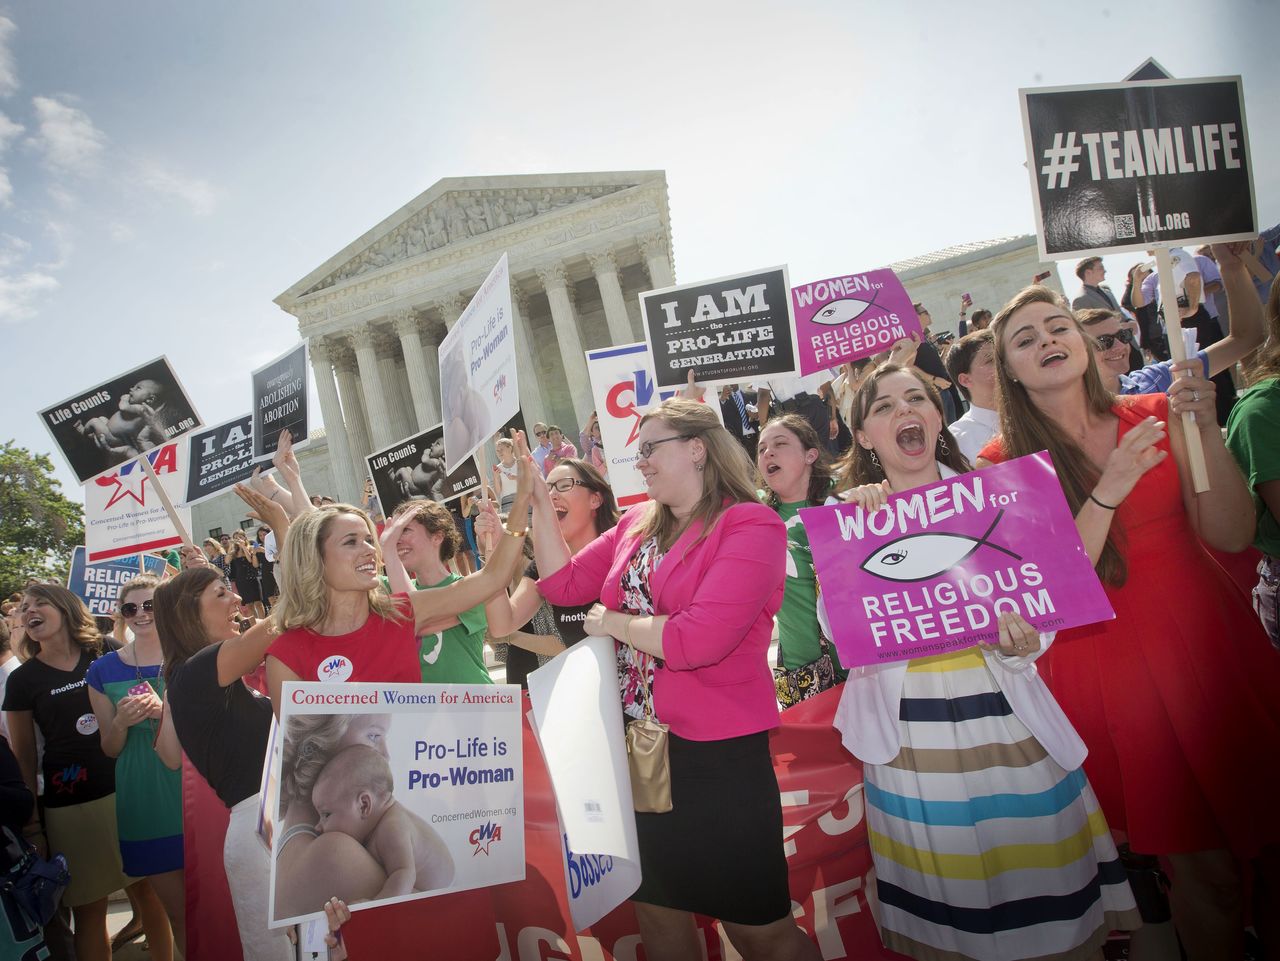 In this June 30, 2014, photo, demonstrators react to hearing the Supreme Court’s decision on the Hobby Lobby birth control case outside the Supreme Court in Washington. The Supreme Court rid itself Monday of a knotty dispute between faith-based groups and the Obama administration over birth control. The court asked lower courts to take another look at the issue in a search for a compromise.